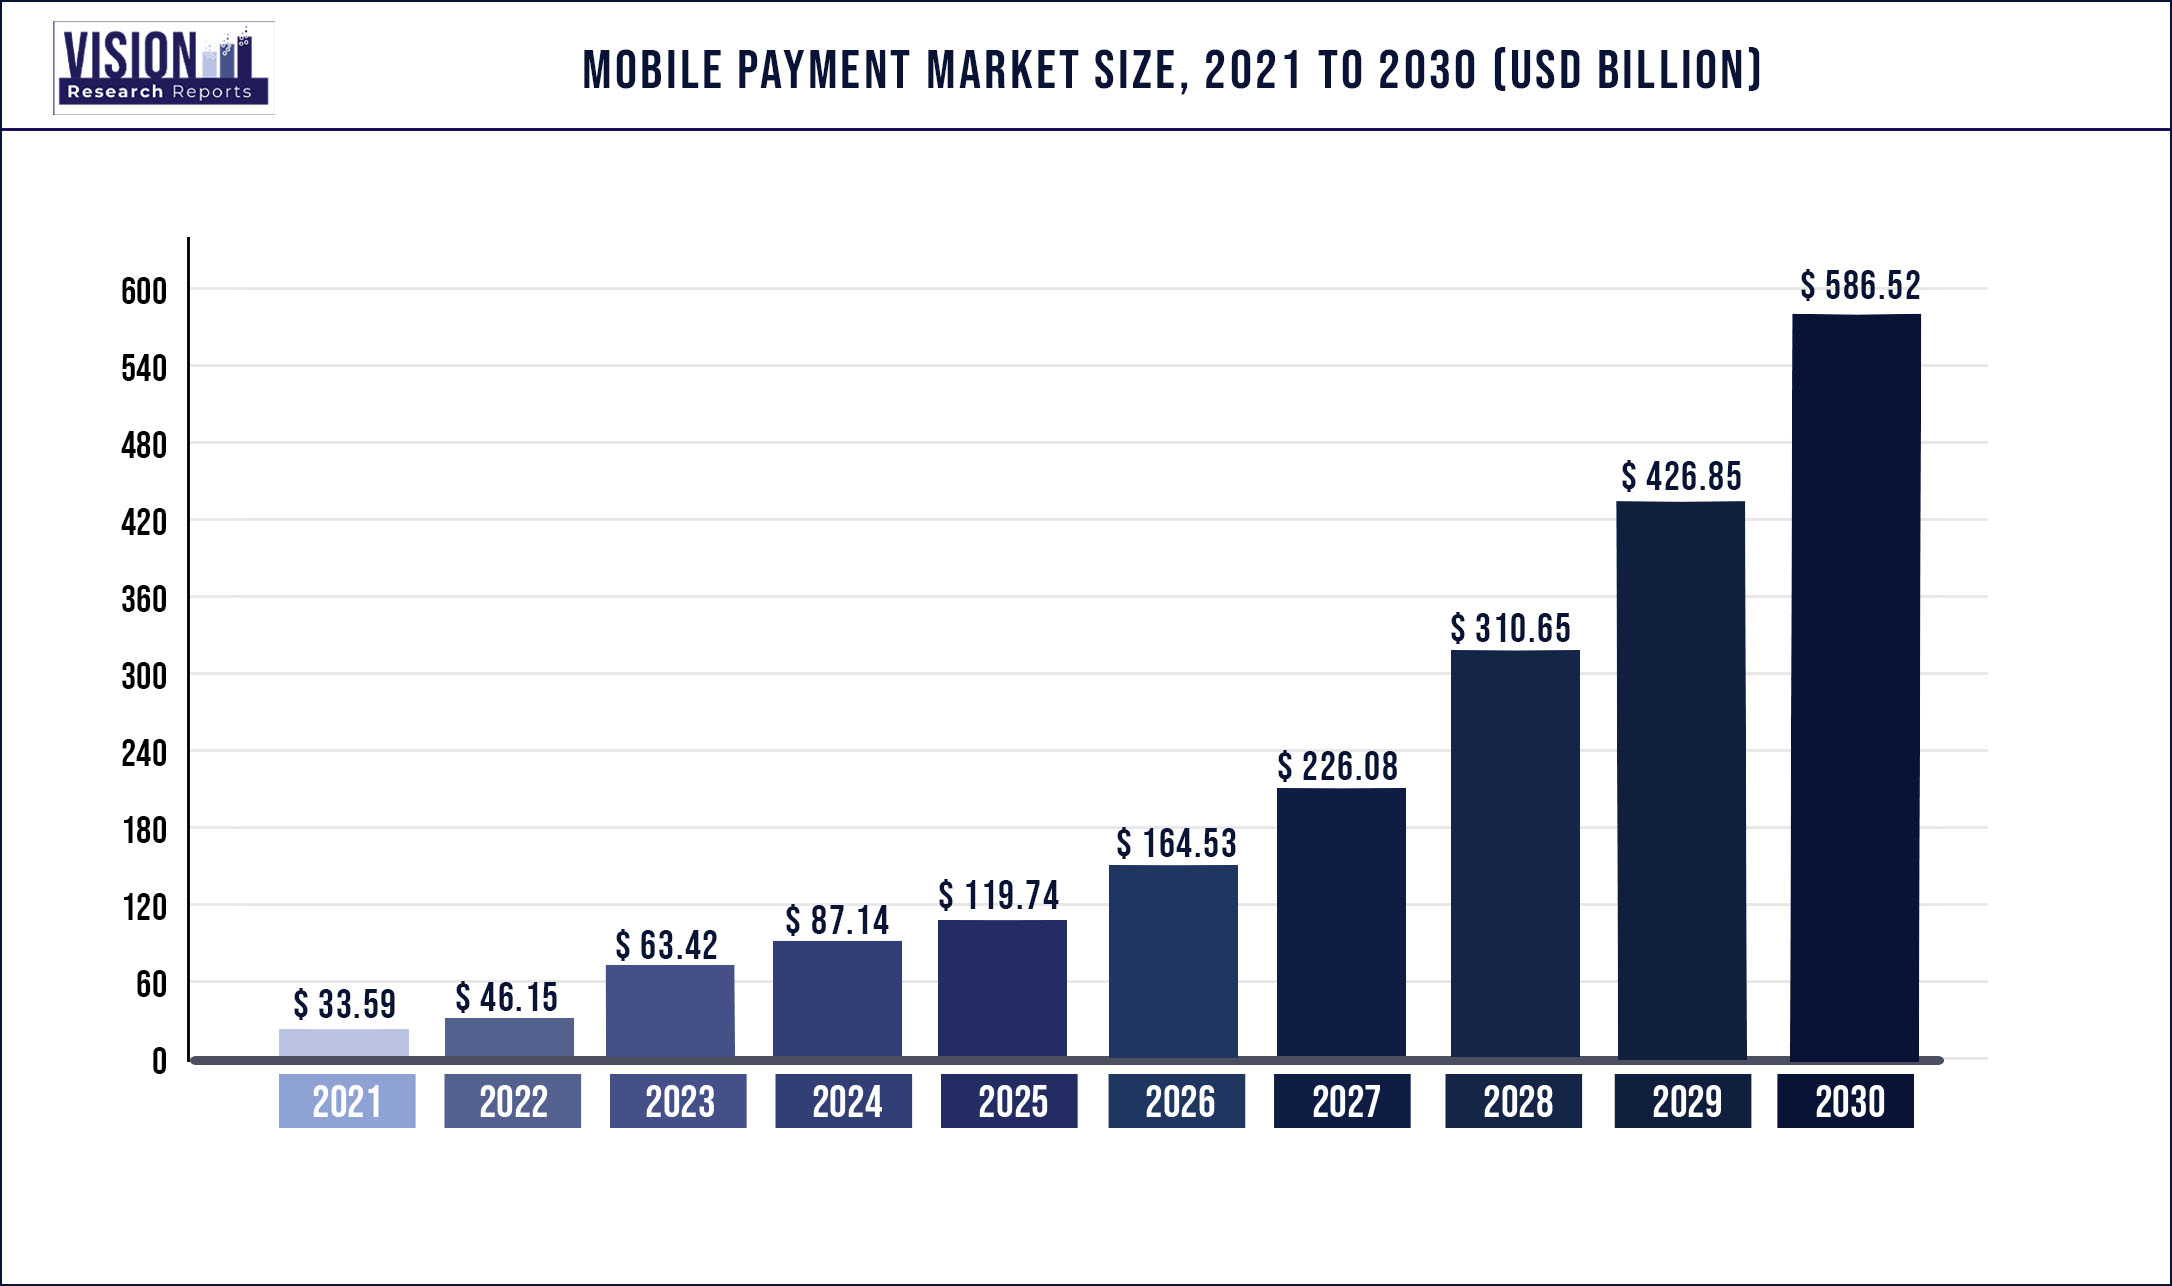 Mobile Payment Market Size 2021 to 2030